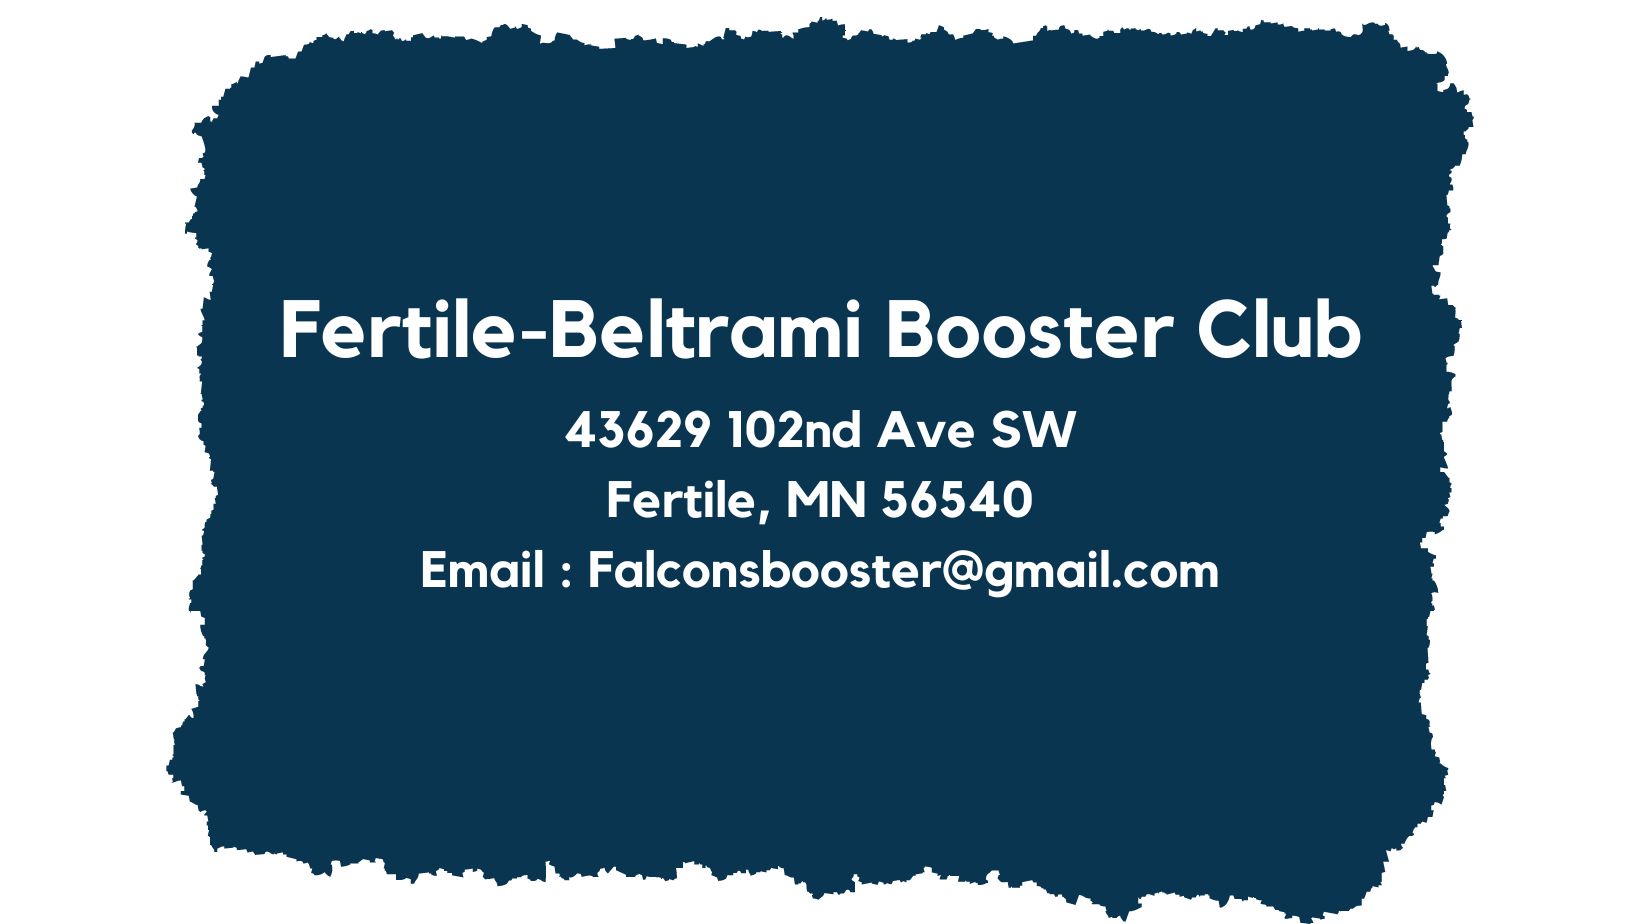 Address and email for Fertile-Beltrami Booster Club is 43629 102nd Ave SW, Fertile, MN 56540, Email : Falconsbooster@gmail.com